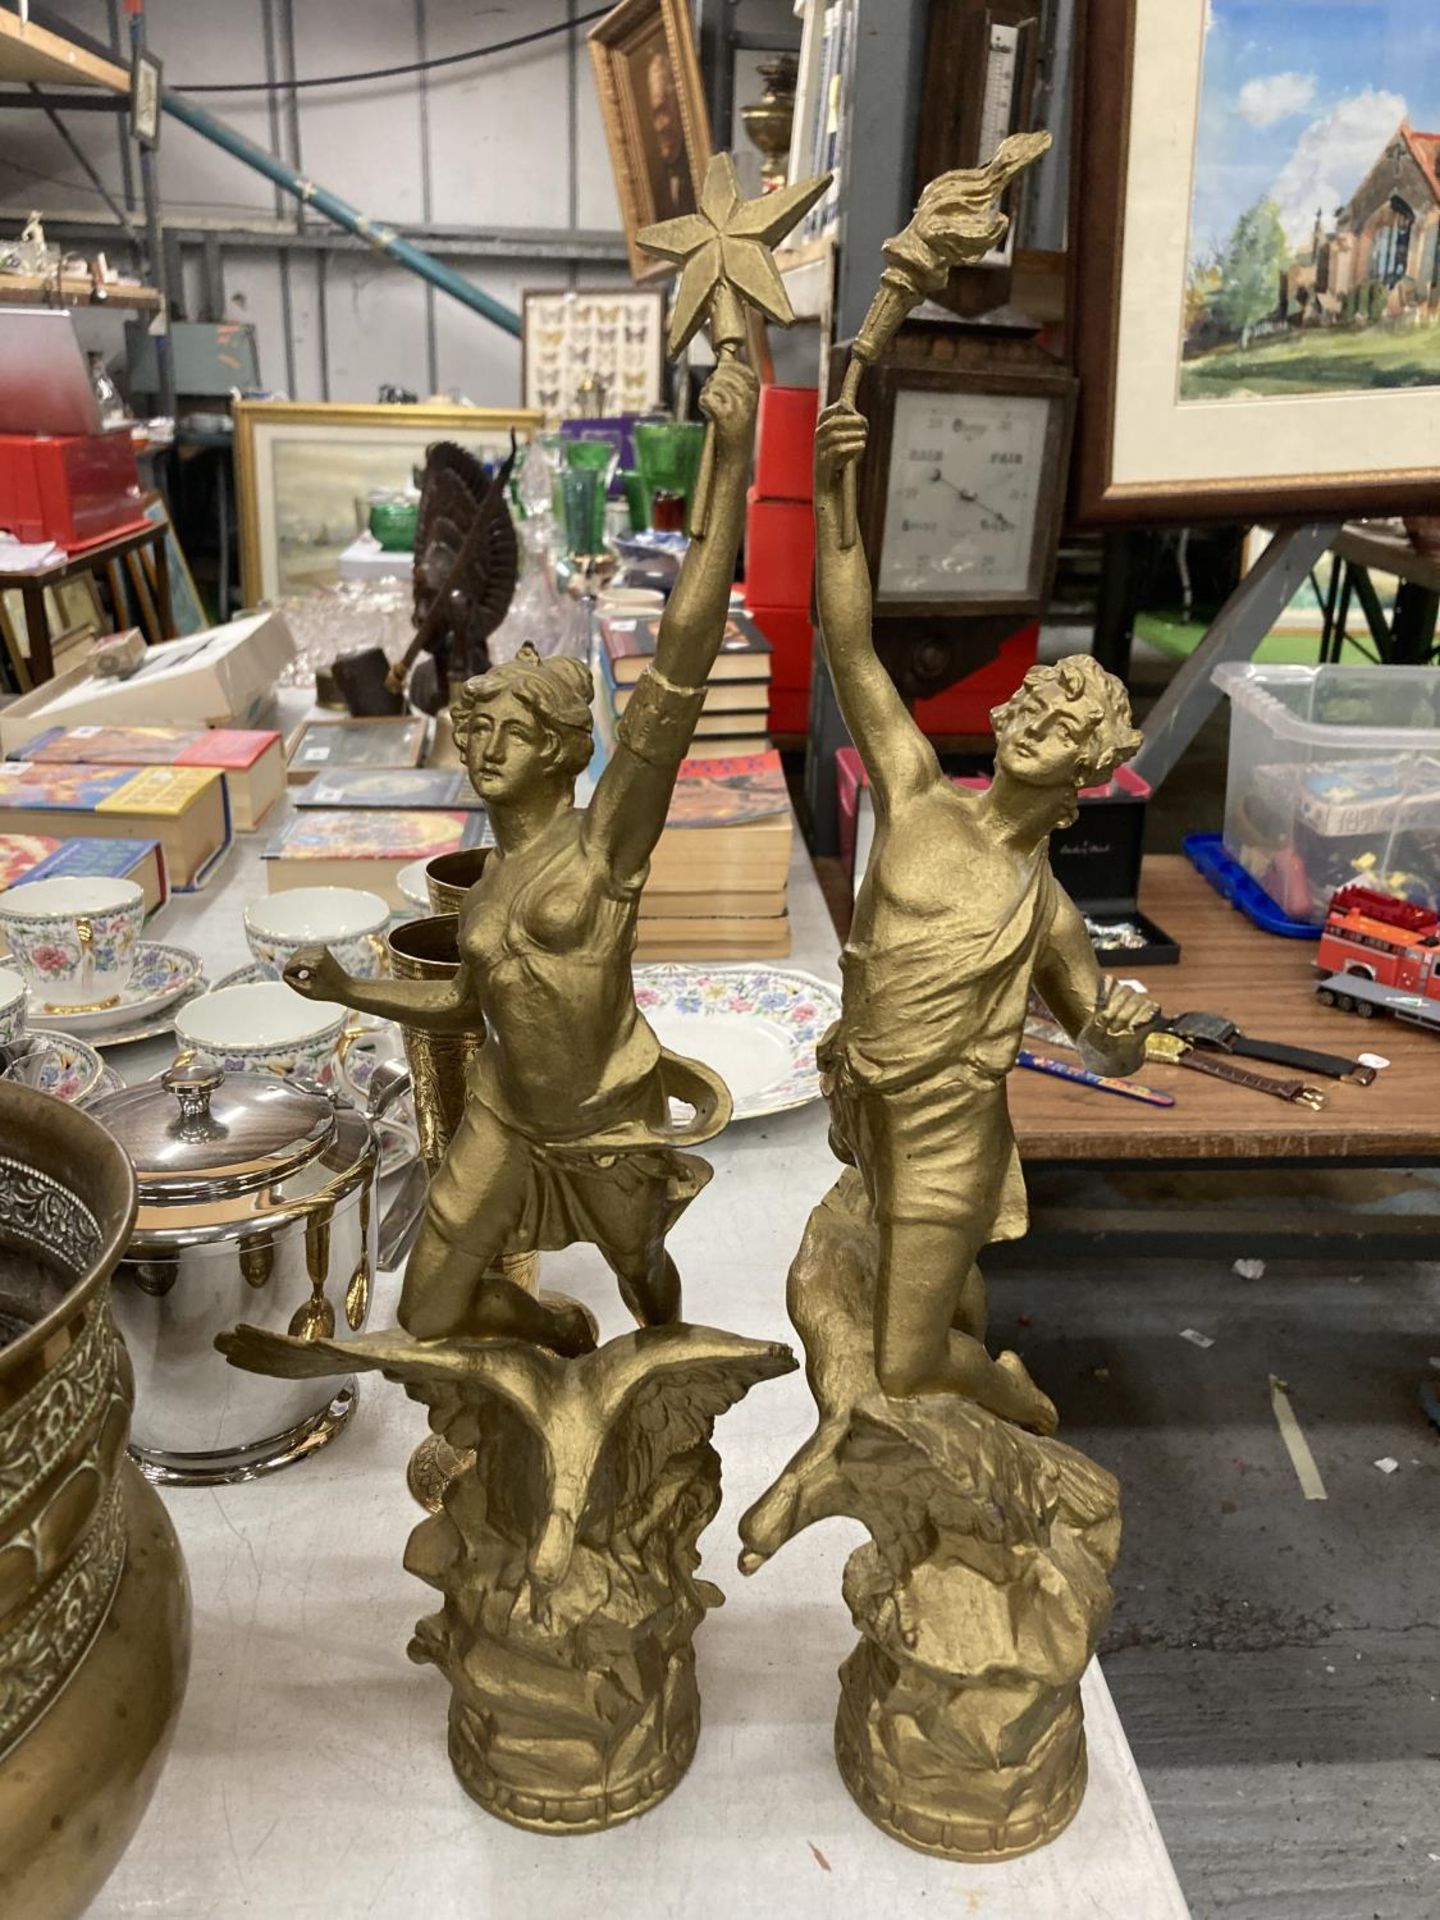 TWO YELLOW METAL STATUES OF CLASSICAL FIGURES